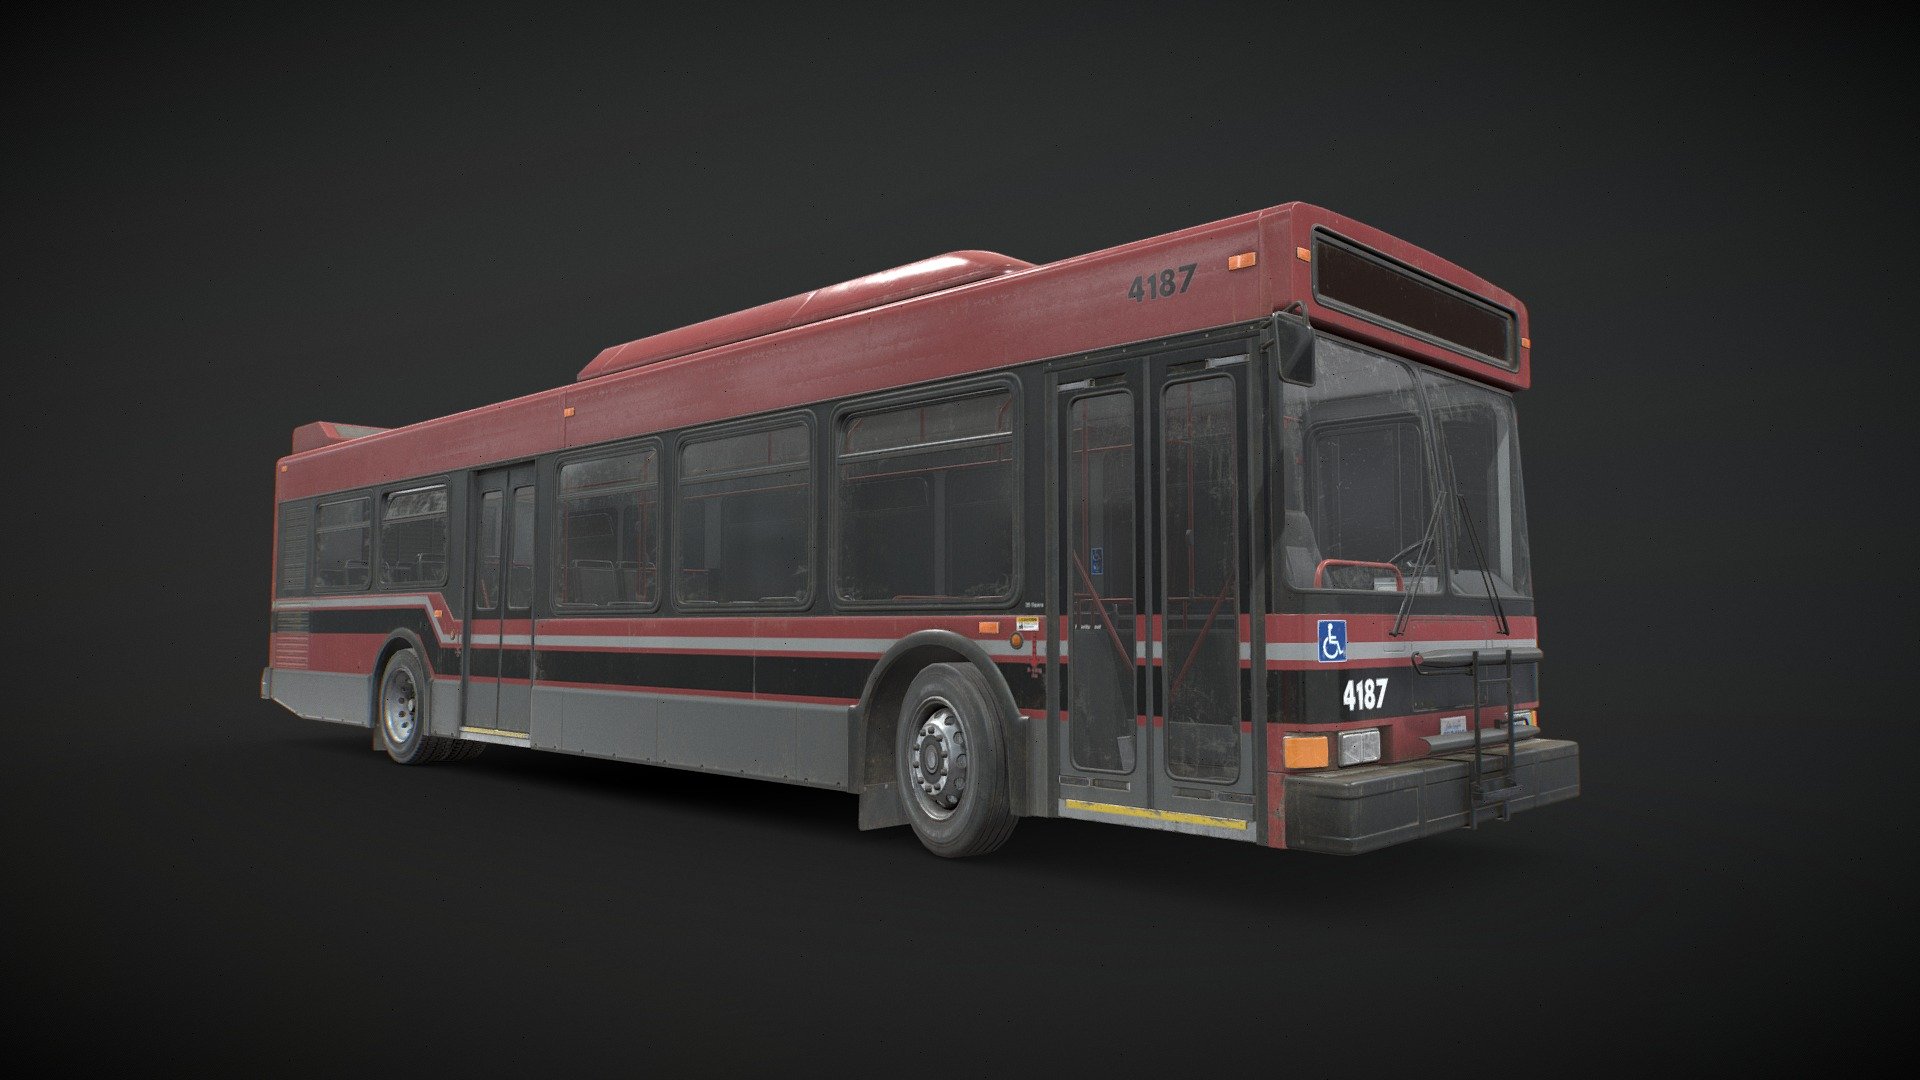 Generic City Transit Bus 3D low poly model:




Real-world scale and centered.

The unit of measurement used for the model is centimeters

Doors, wheels, steering wheel, windows and bike rack are separated and can be easily rigged/animated (model not animated).

Interior is a separate object to detach if needed.

PBR textures made in Substance Painter

All branding and labels are custom made.

Approx. size:  L: 12,4m  W: 2,55m  H: 3,25m (not including mirrors)

Version with open doors also included

Total Polys:  18.711 (36.331 tris)

Maps sizes: 




Body: 4096x4096

Details: 4096x4096

Interior: 4096x4096

Wheels: 2048x2048

Glass: 2048x2048

Decals: 2048x2048

Provided Maps:




Albedo 

Normal

Roughness

Metalness

AO

Opacity included in Albedo (glass and decals)

Emissive

Formats Incuded - MAX / BLEND / OBJ / FBX 

Packed ORM textures available uppon request

This model can be used for any game, film, personal project, etc. You may not resell or redistribute any content - City Bus V4 - Low Poly - Buy Royalty Free 3D model by MSWoodvine 3d model